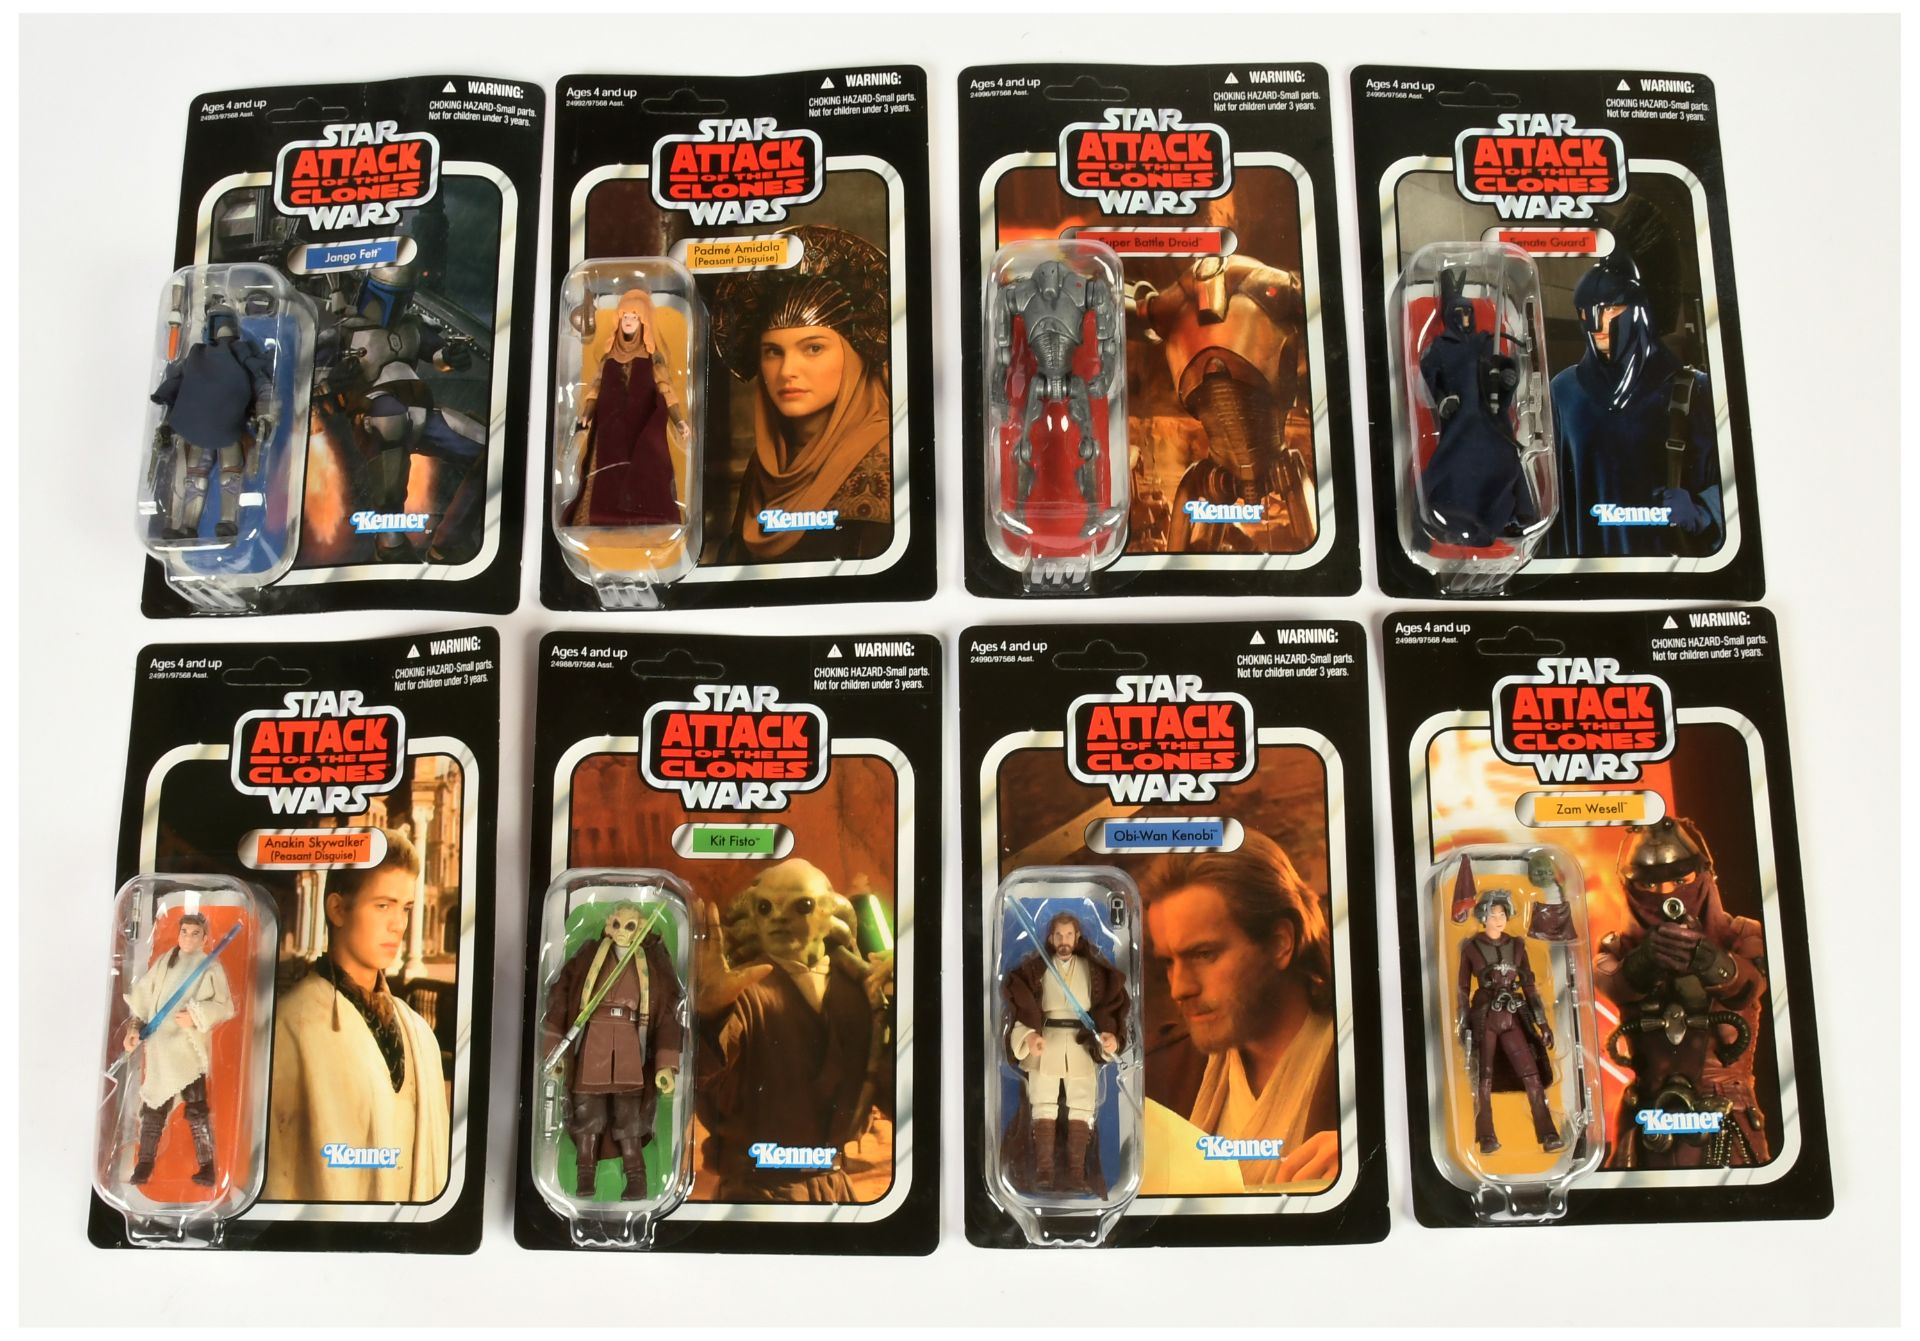 Quantity of Hasbro Star Wars The Vintage Collection 3 3/4" Action Figures